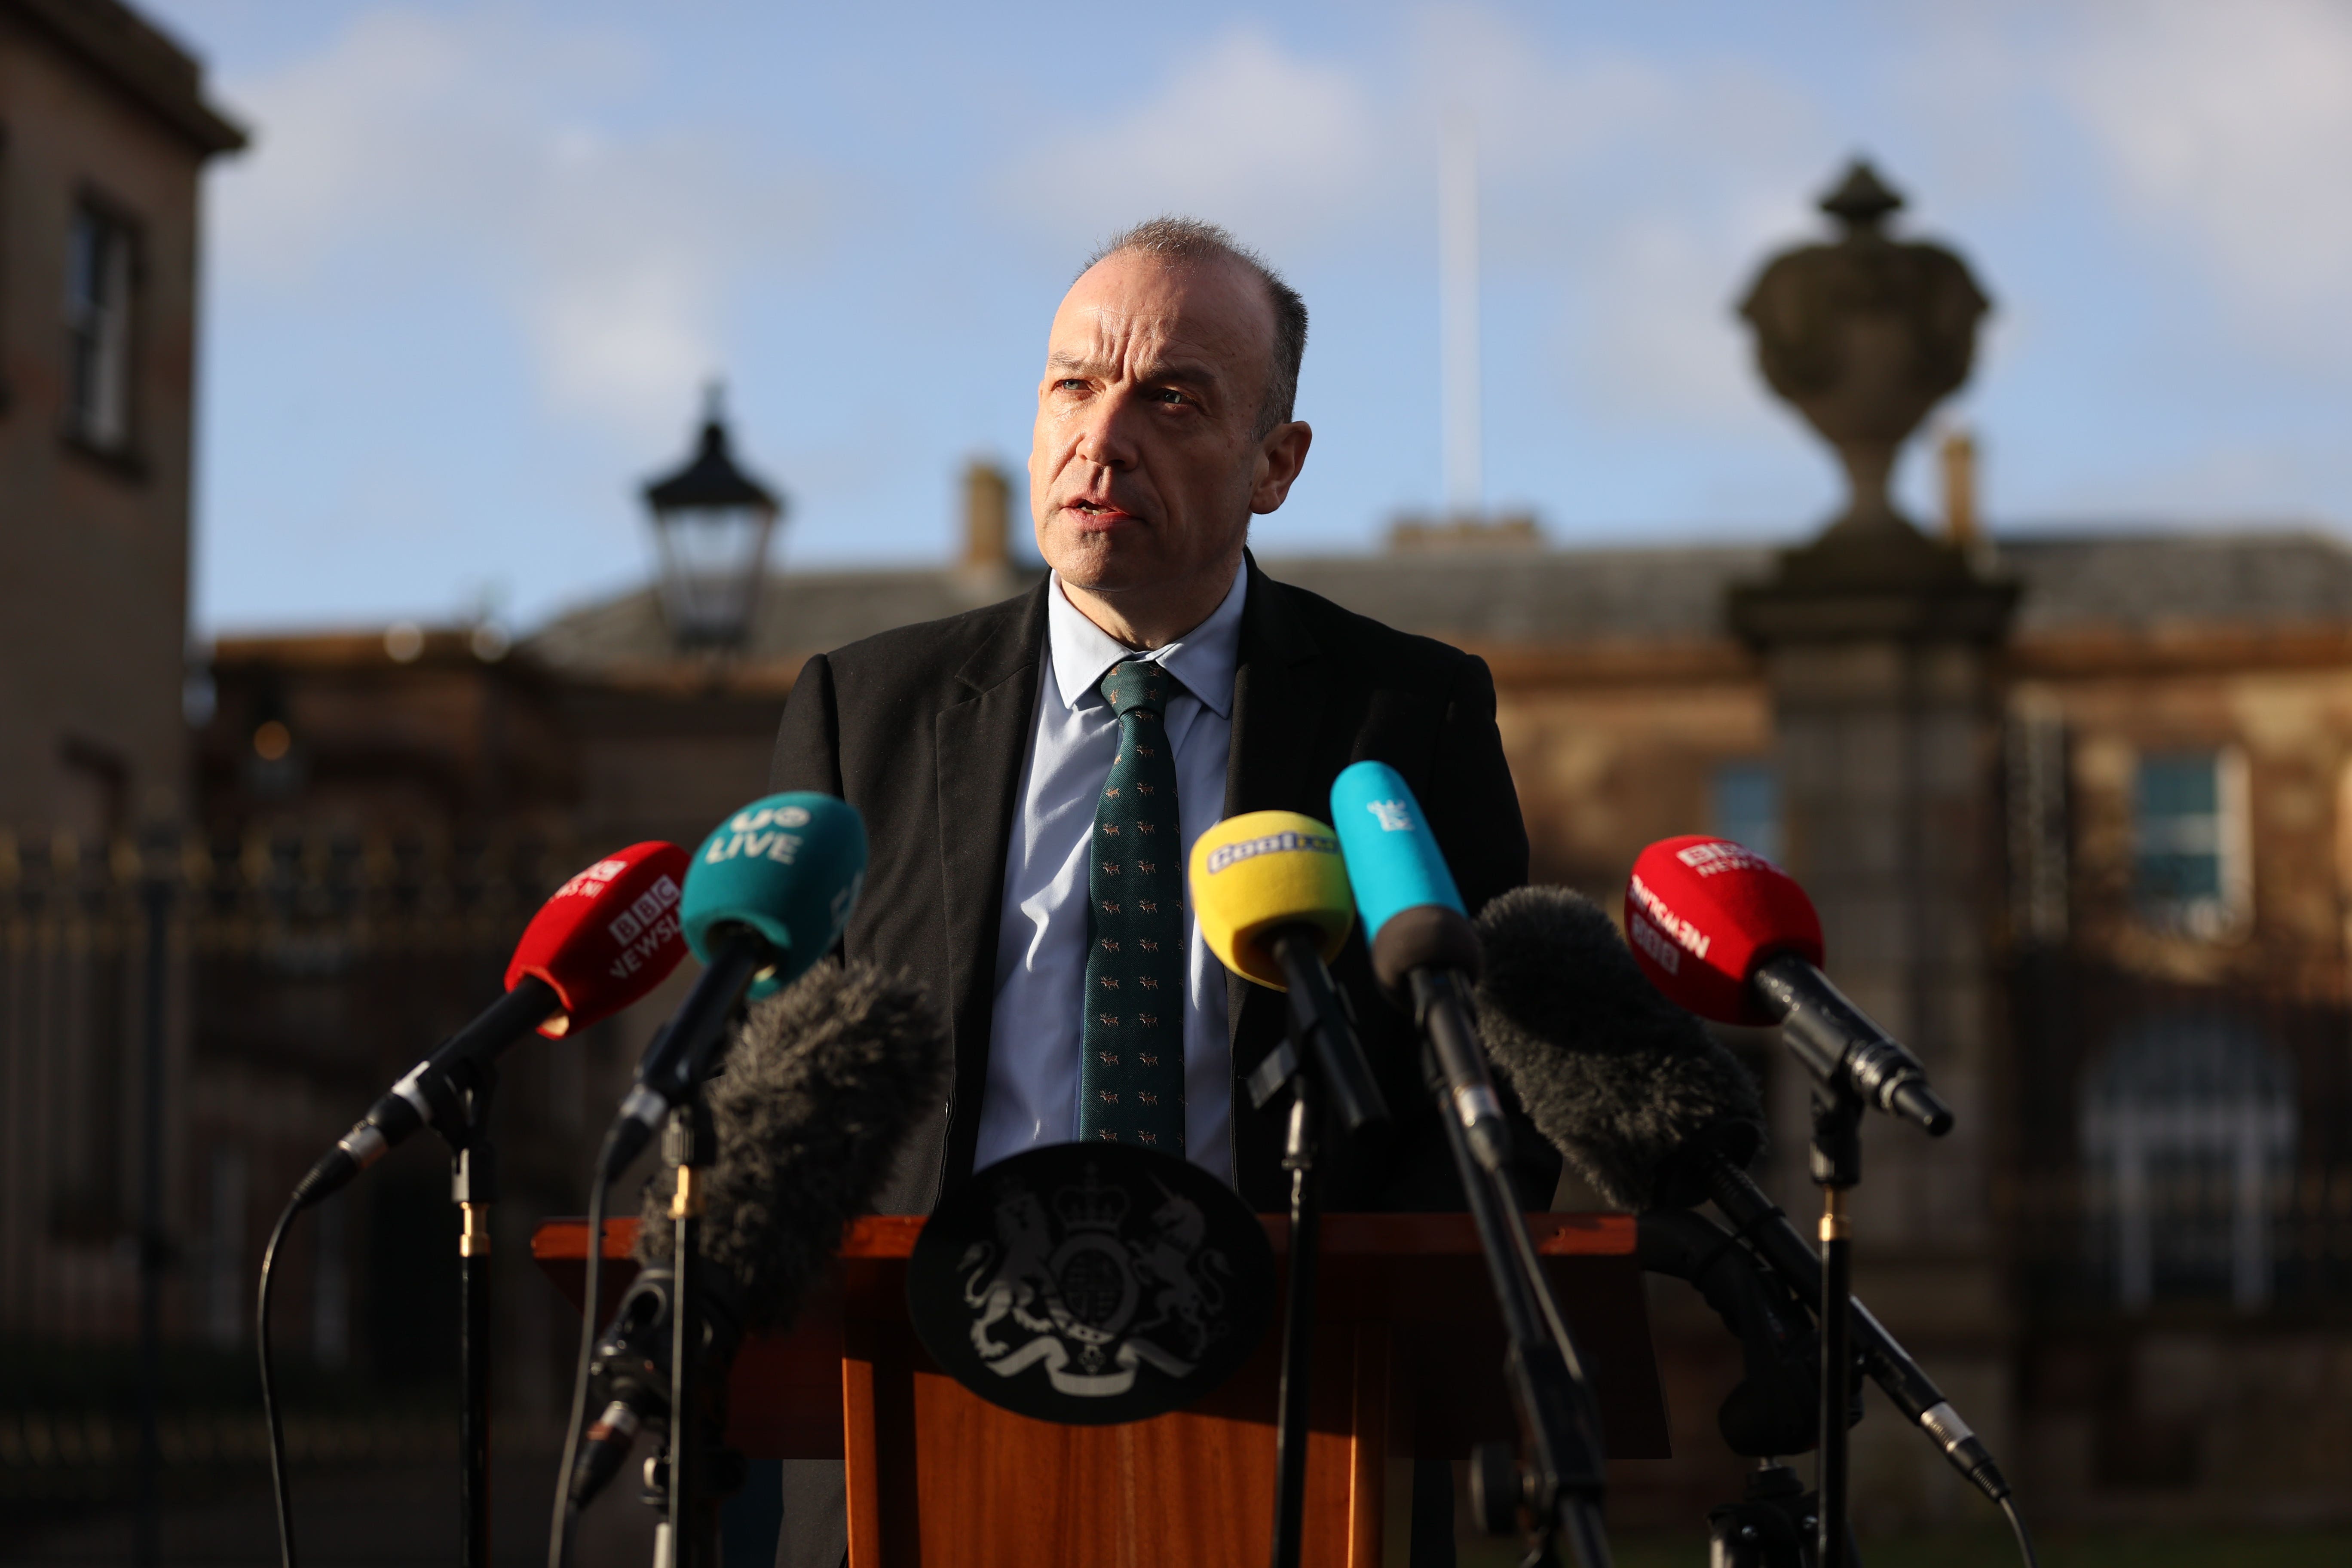 Northern Ireland Secretary Chris Heaton-Harris says the Government will not allow public services in NI to continue to deteriorate (Liam McBurney/PA)